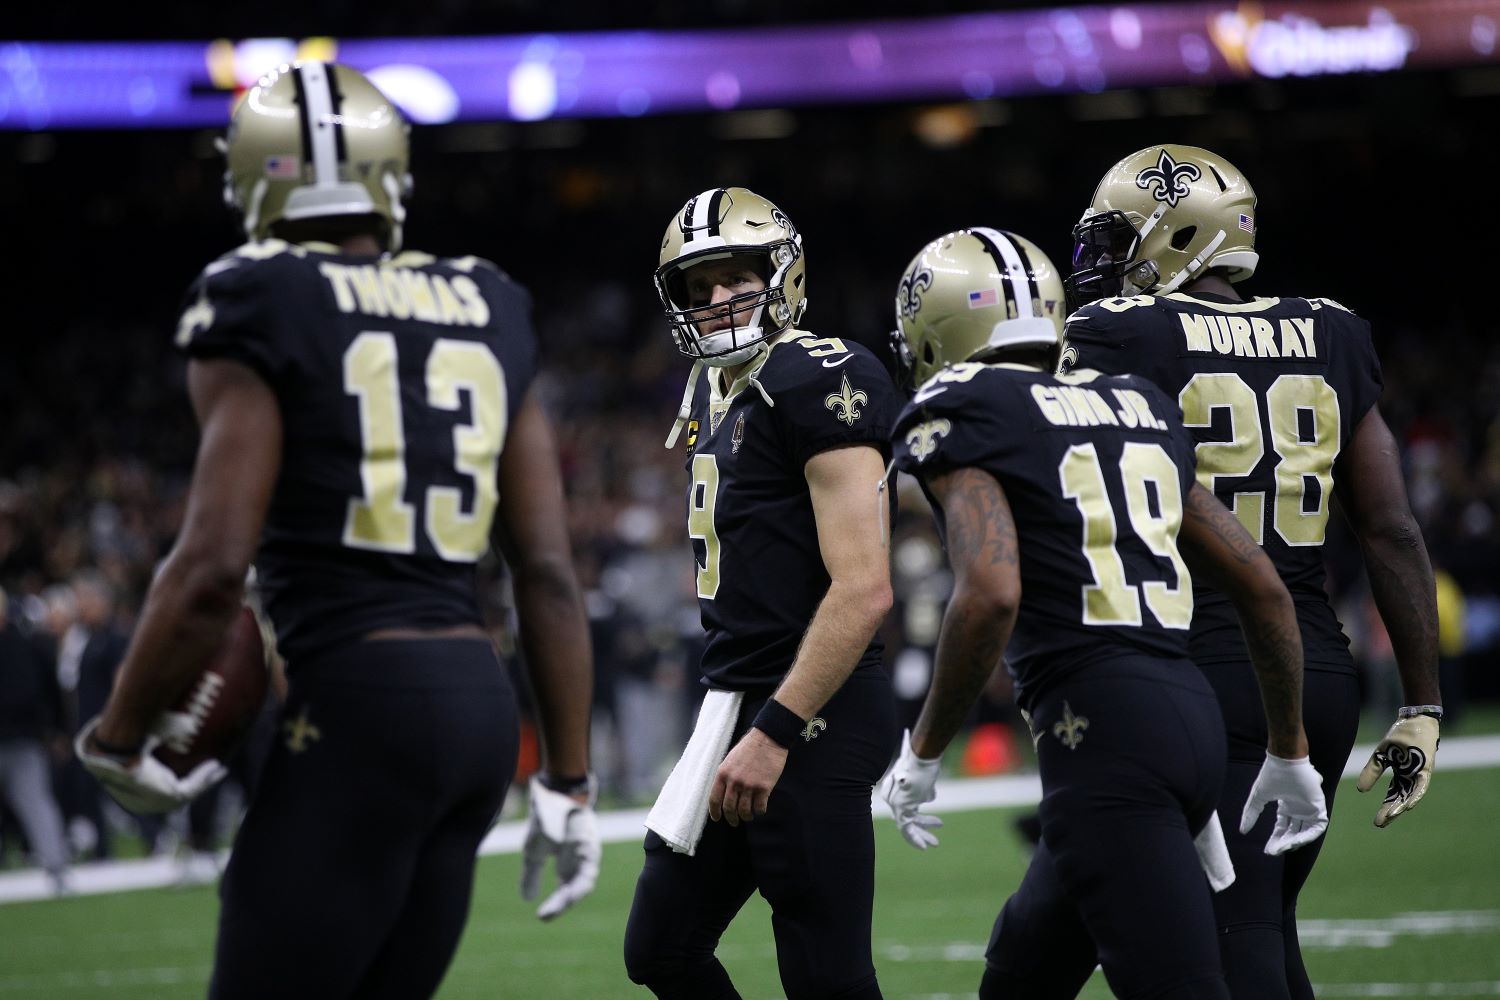 Even though Drew Brees will return to on Sunday, the Saints just suffered a brutal blow to their chances of securing the No. 1 seed.